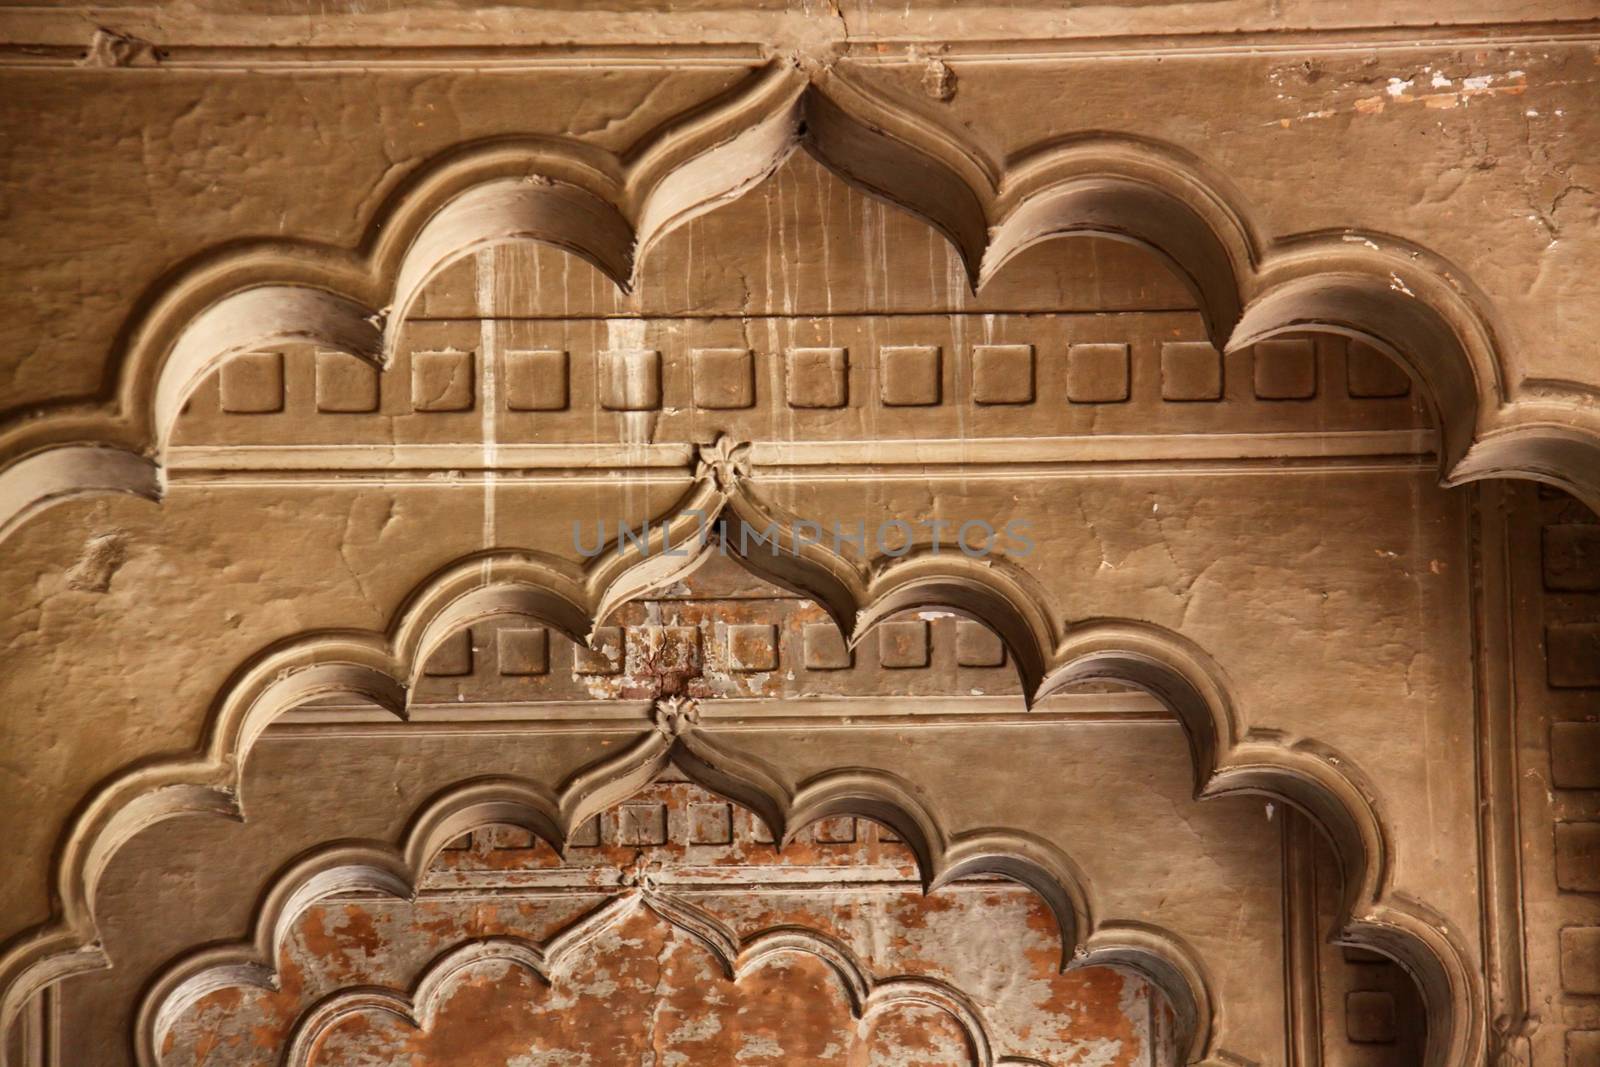 Arches inside of Red Fort in Delhi, India